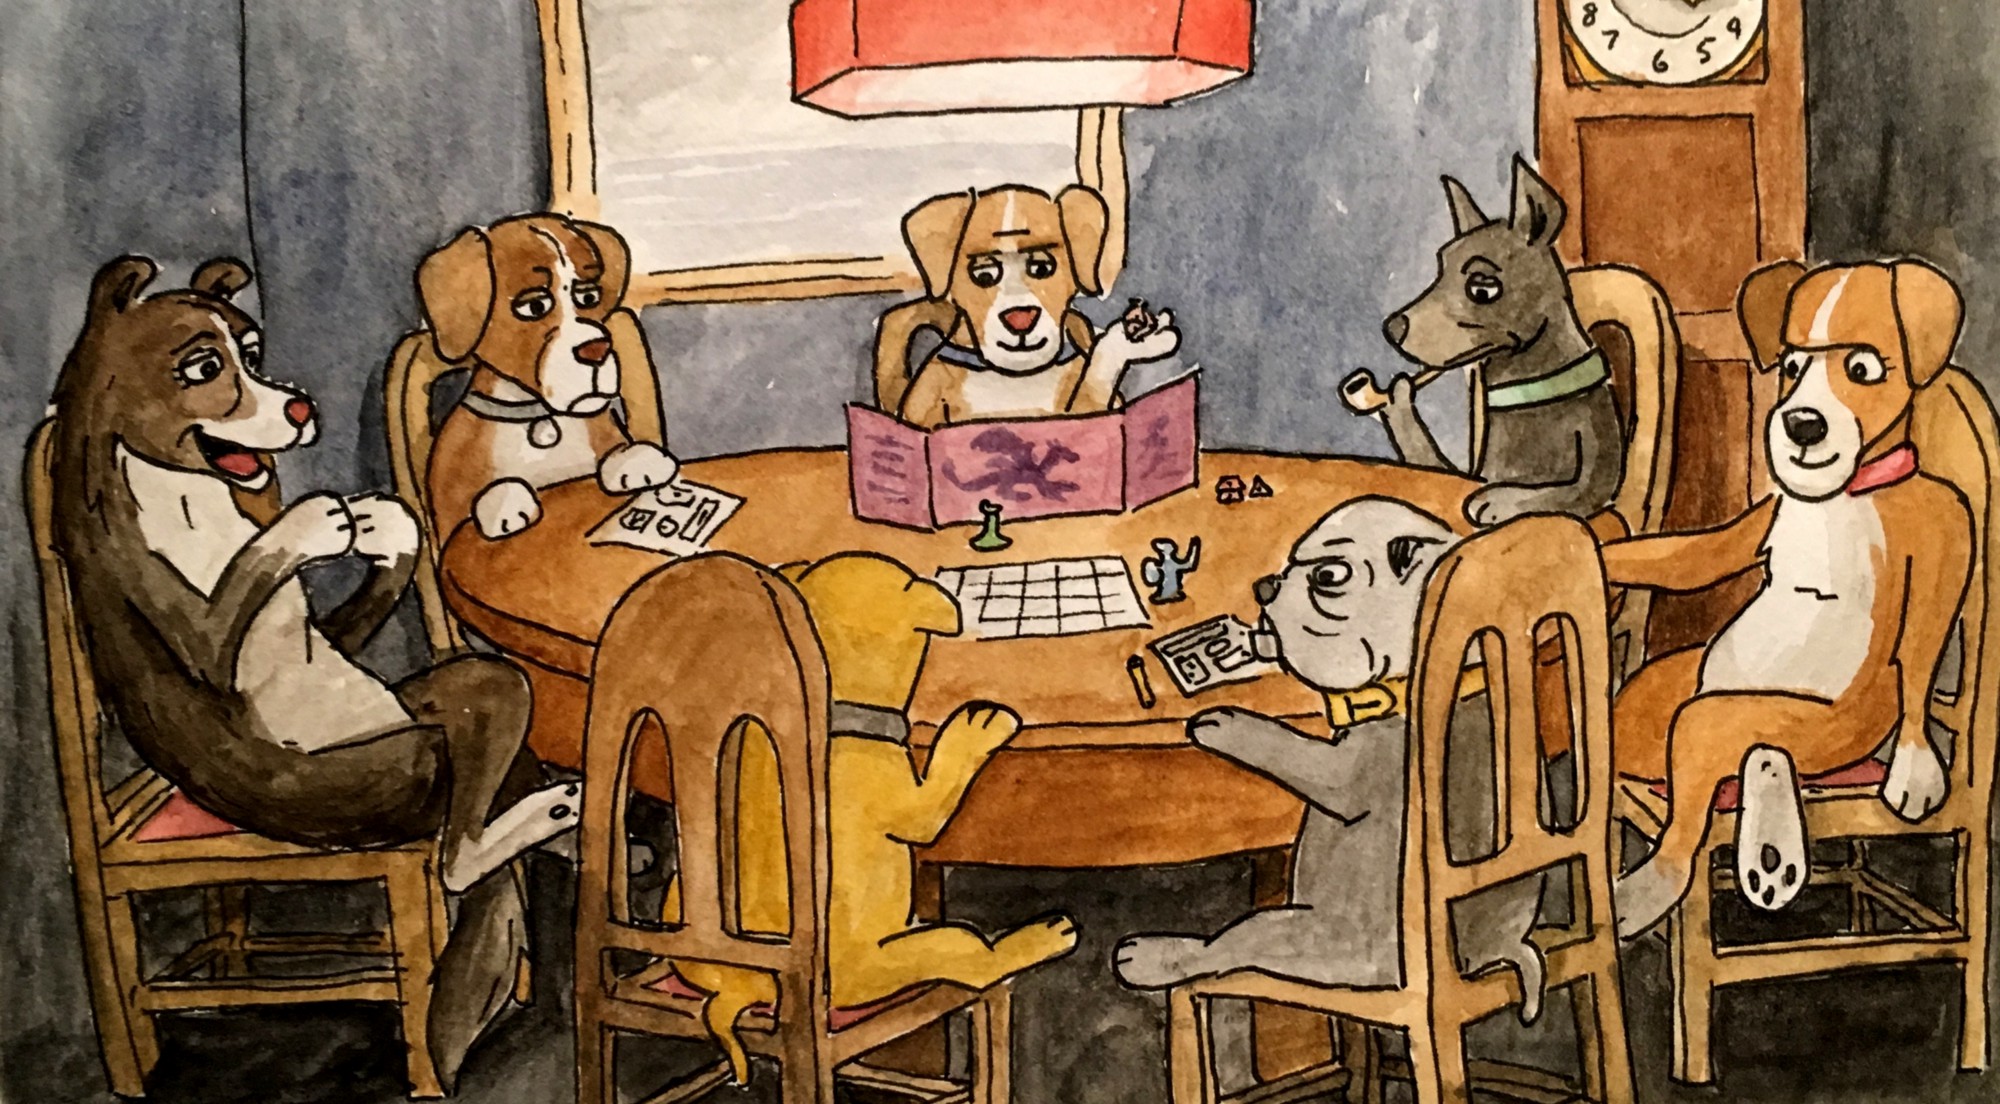 Dogs playing a game of Dungeons & Dragons